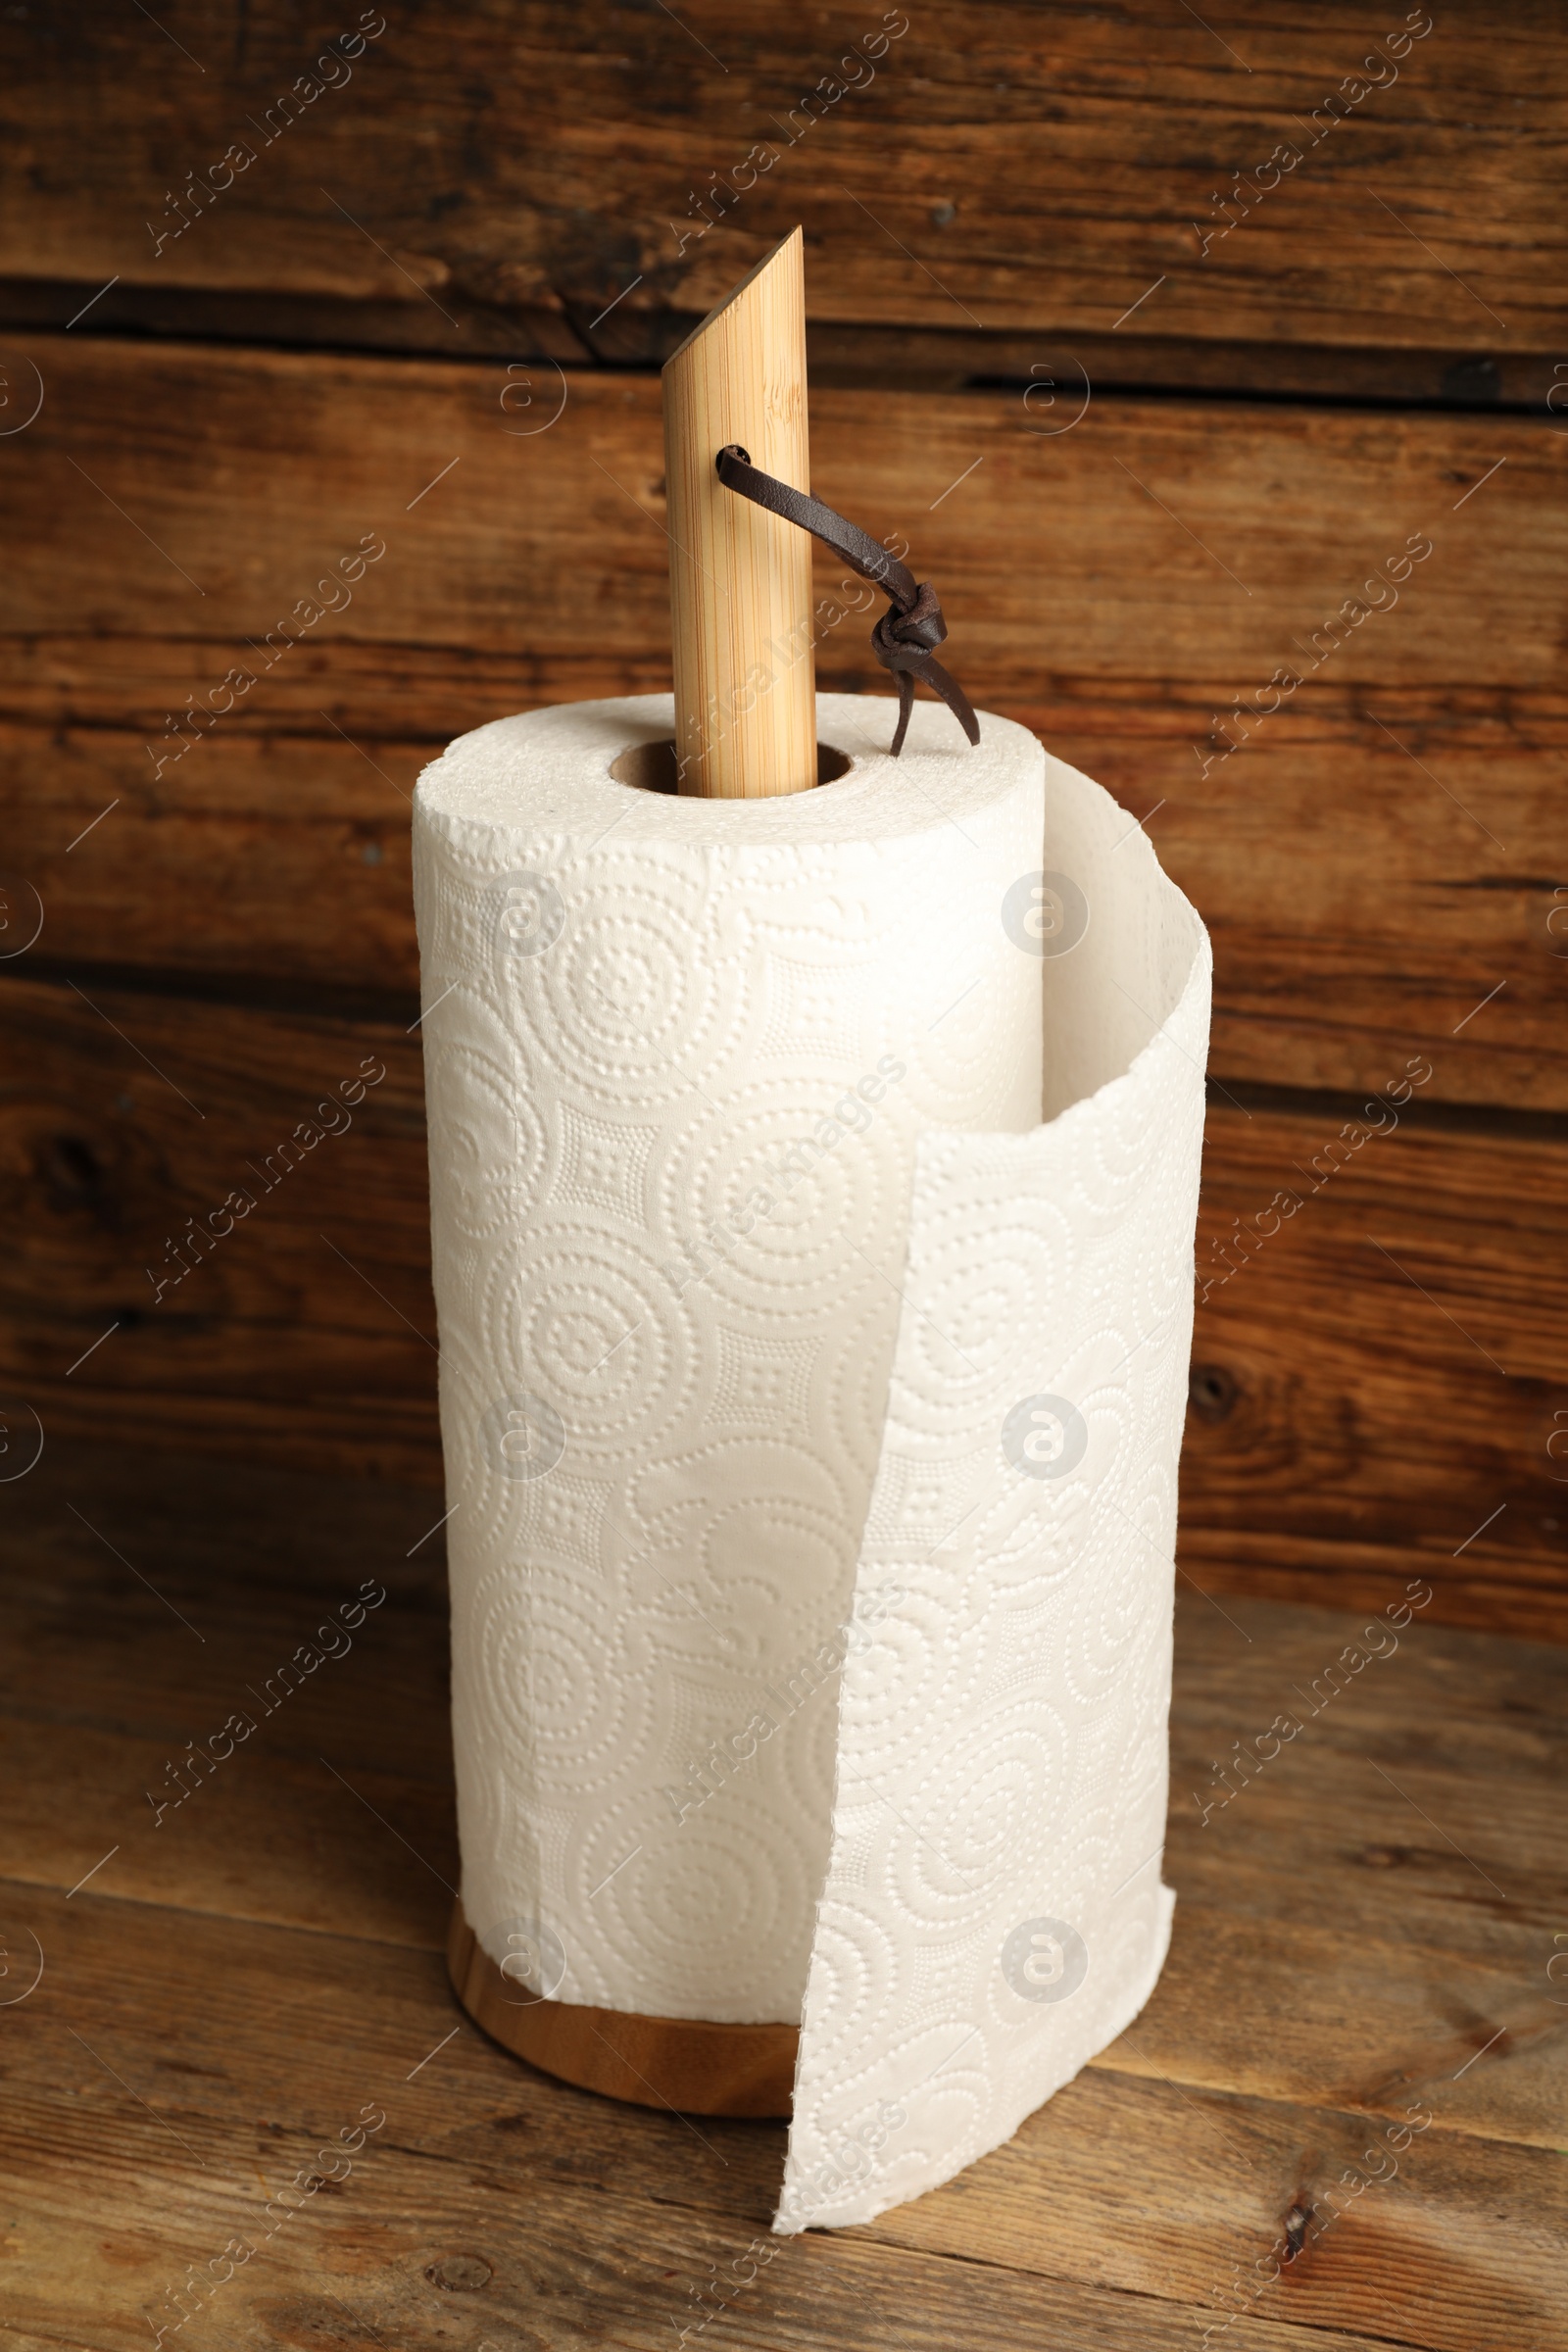 Photo of Holder with roll of white paper towels on wooden table